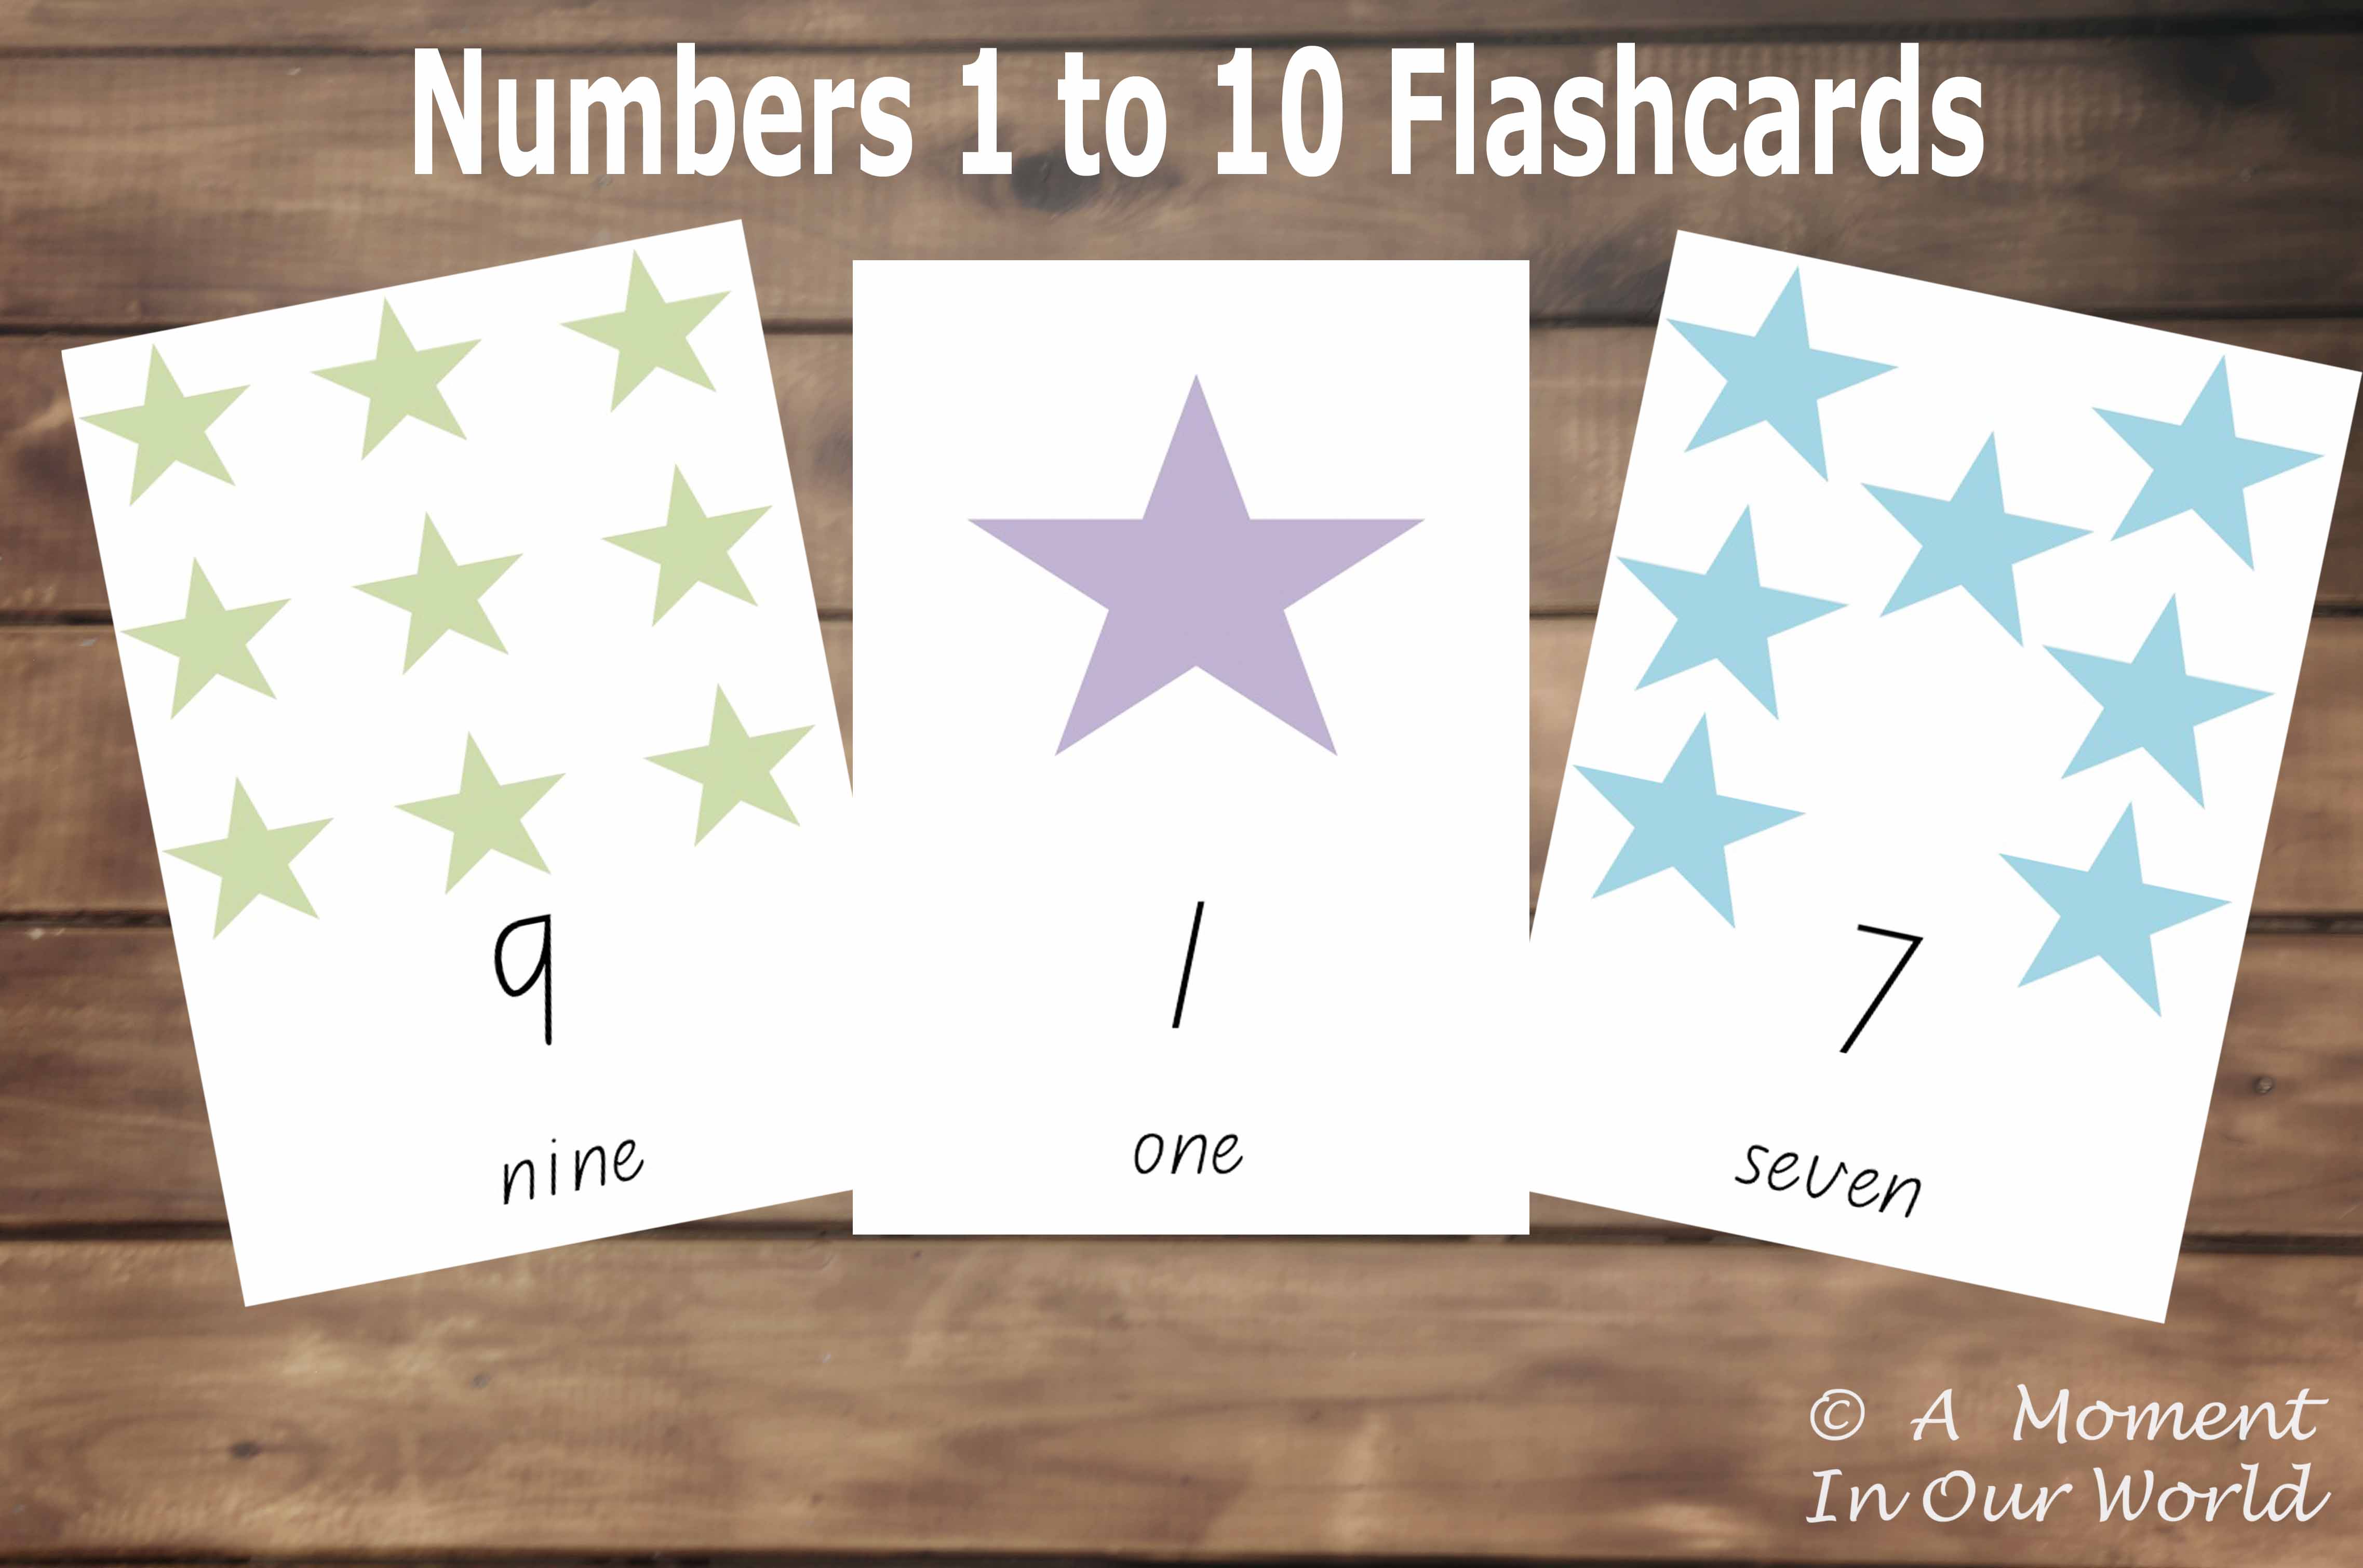 numbers 1 to 10 flashcards